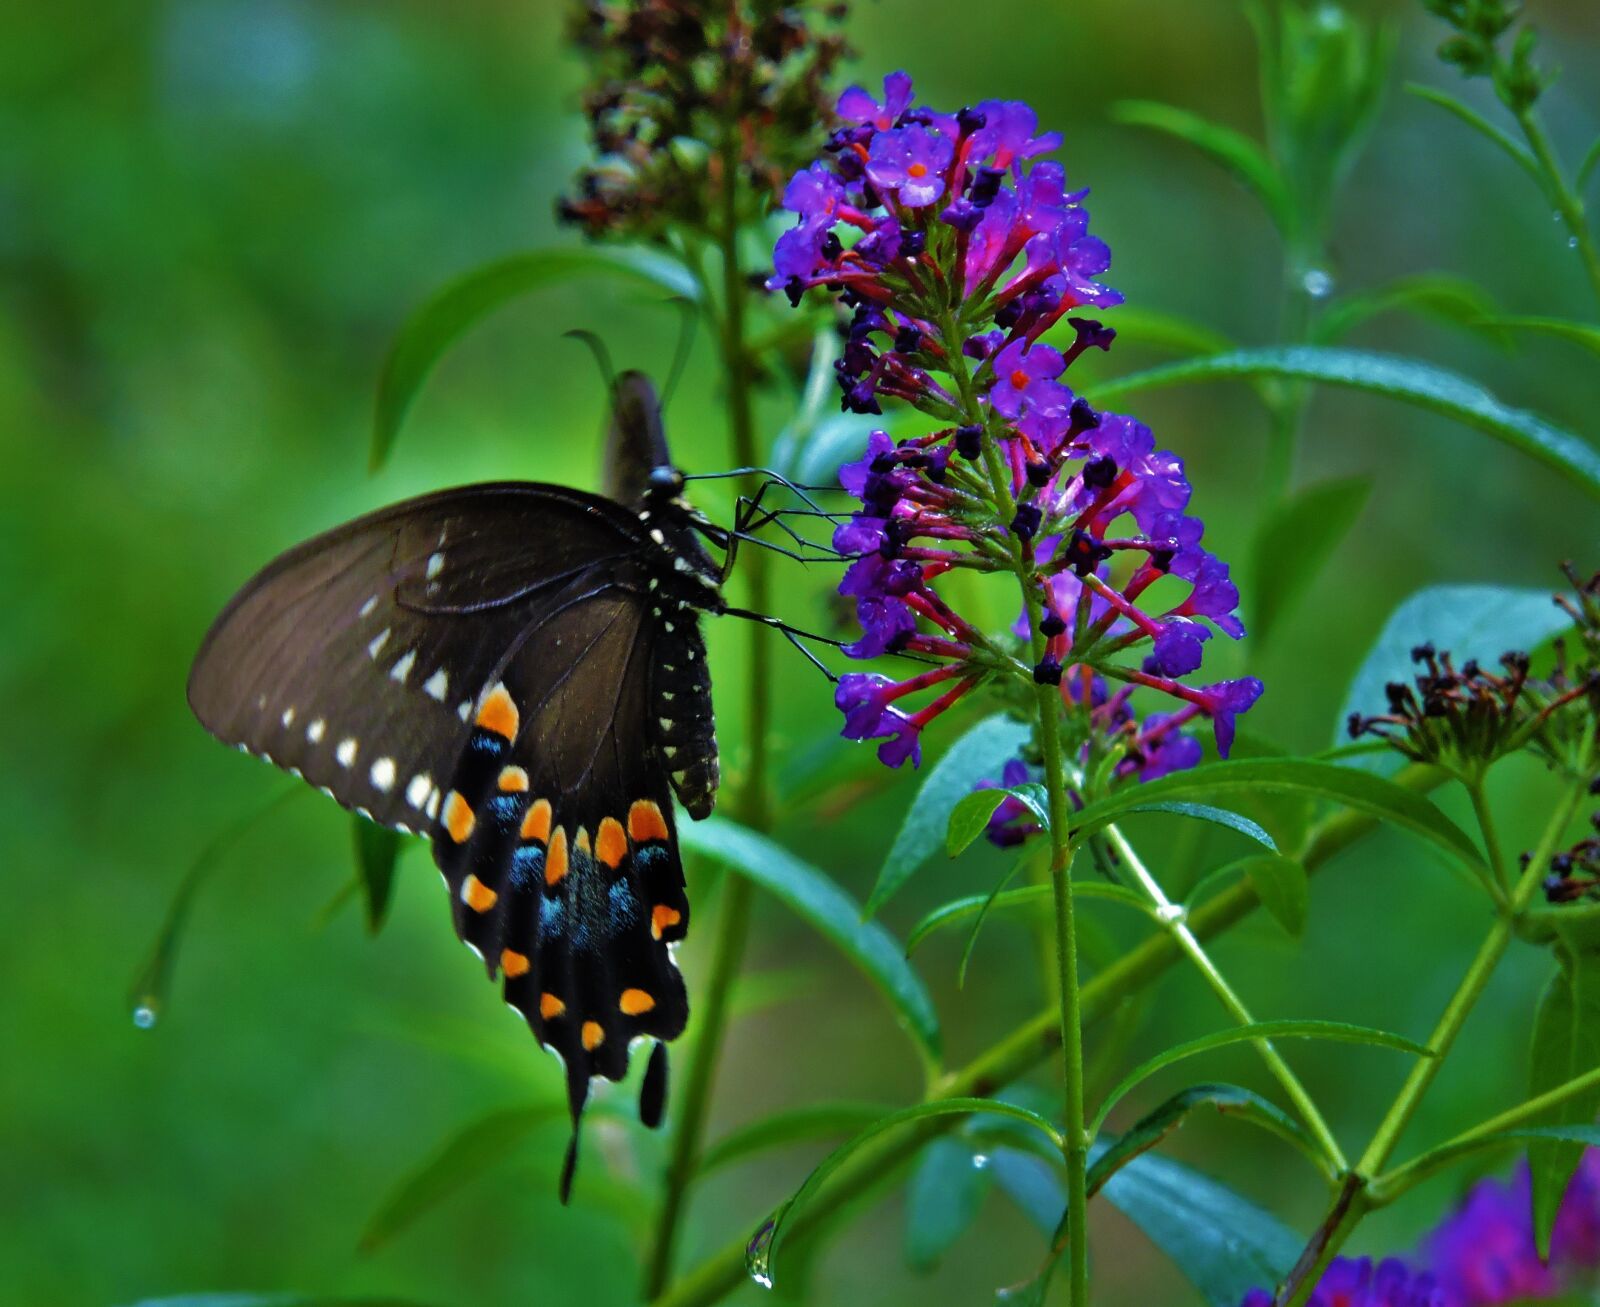 Nikon Coolpix P600 sample photo. Butterfly, swallowtail butterfly, nature photography